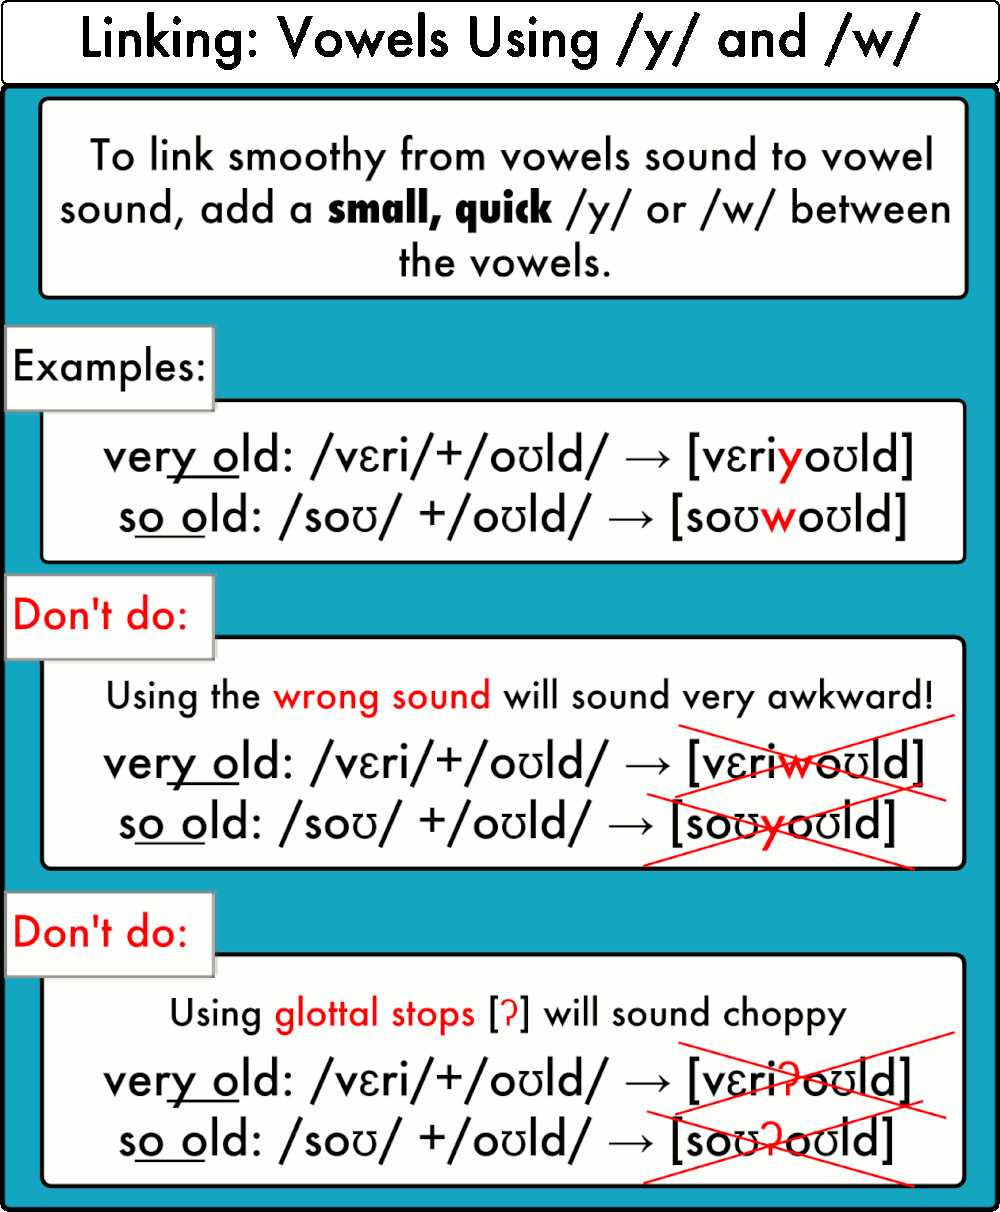 Vowels Sounds Examples DriverLayer Search Engine